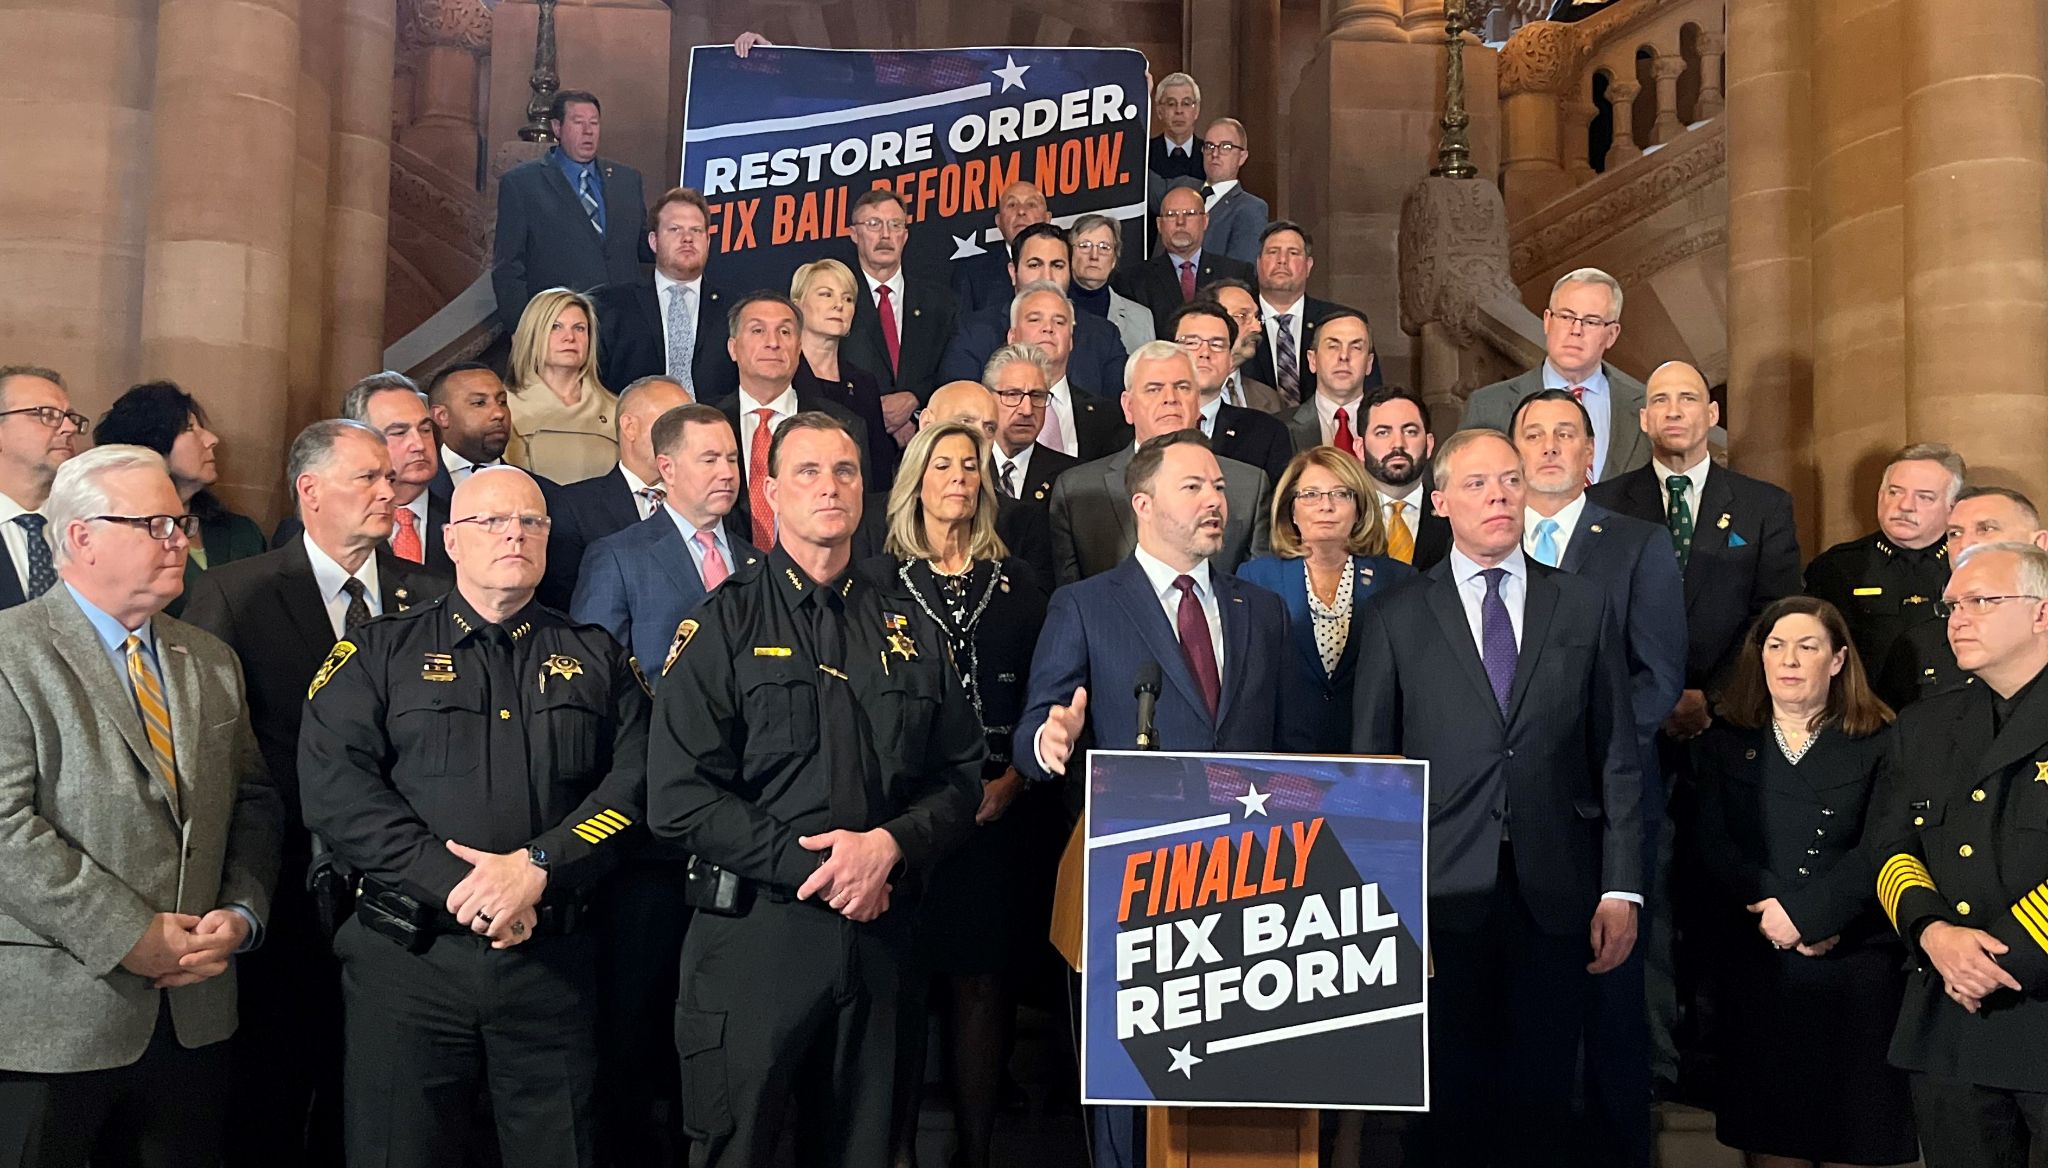 Pictured, at the podium: Senate Republican Leader Rob Ortt with legislative colleagues and law enforcement. (Submitted photo)